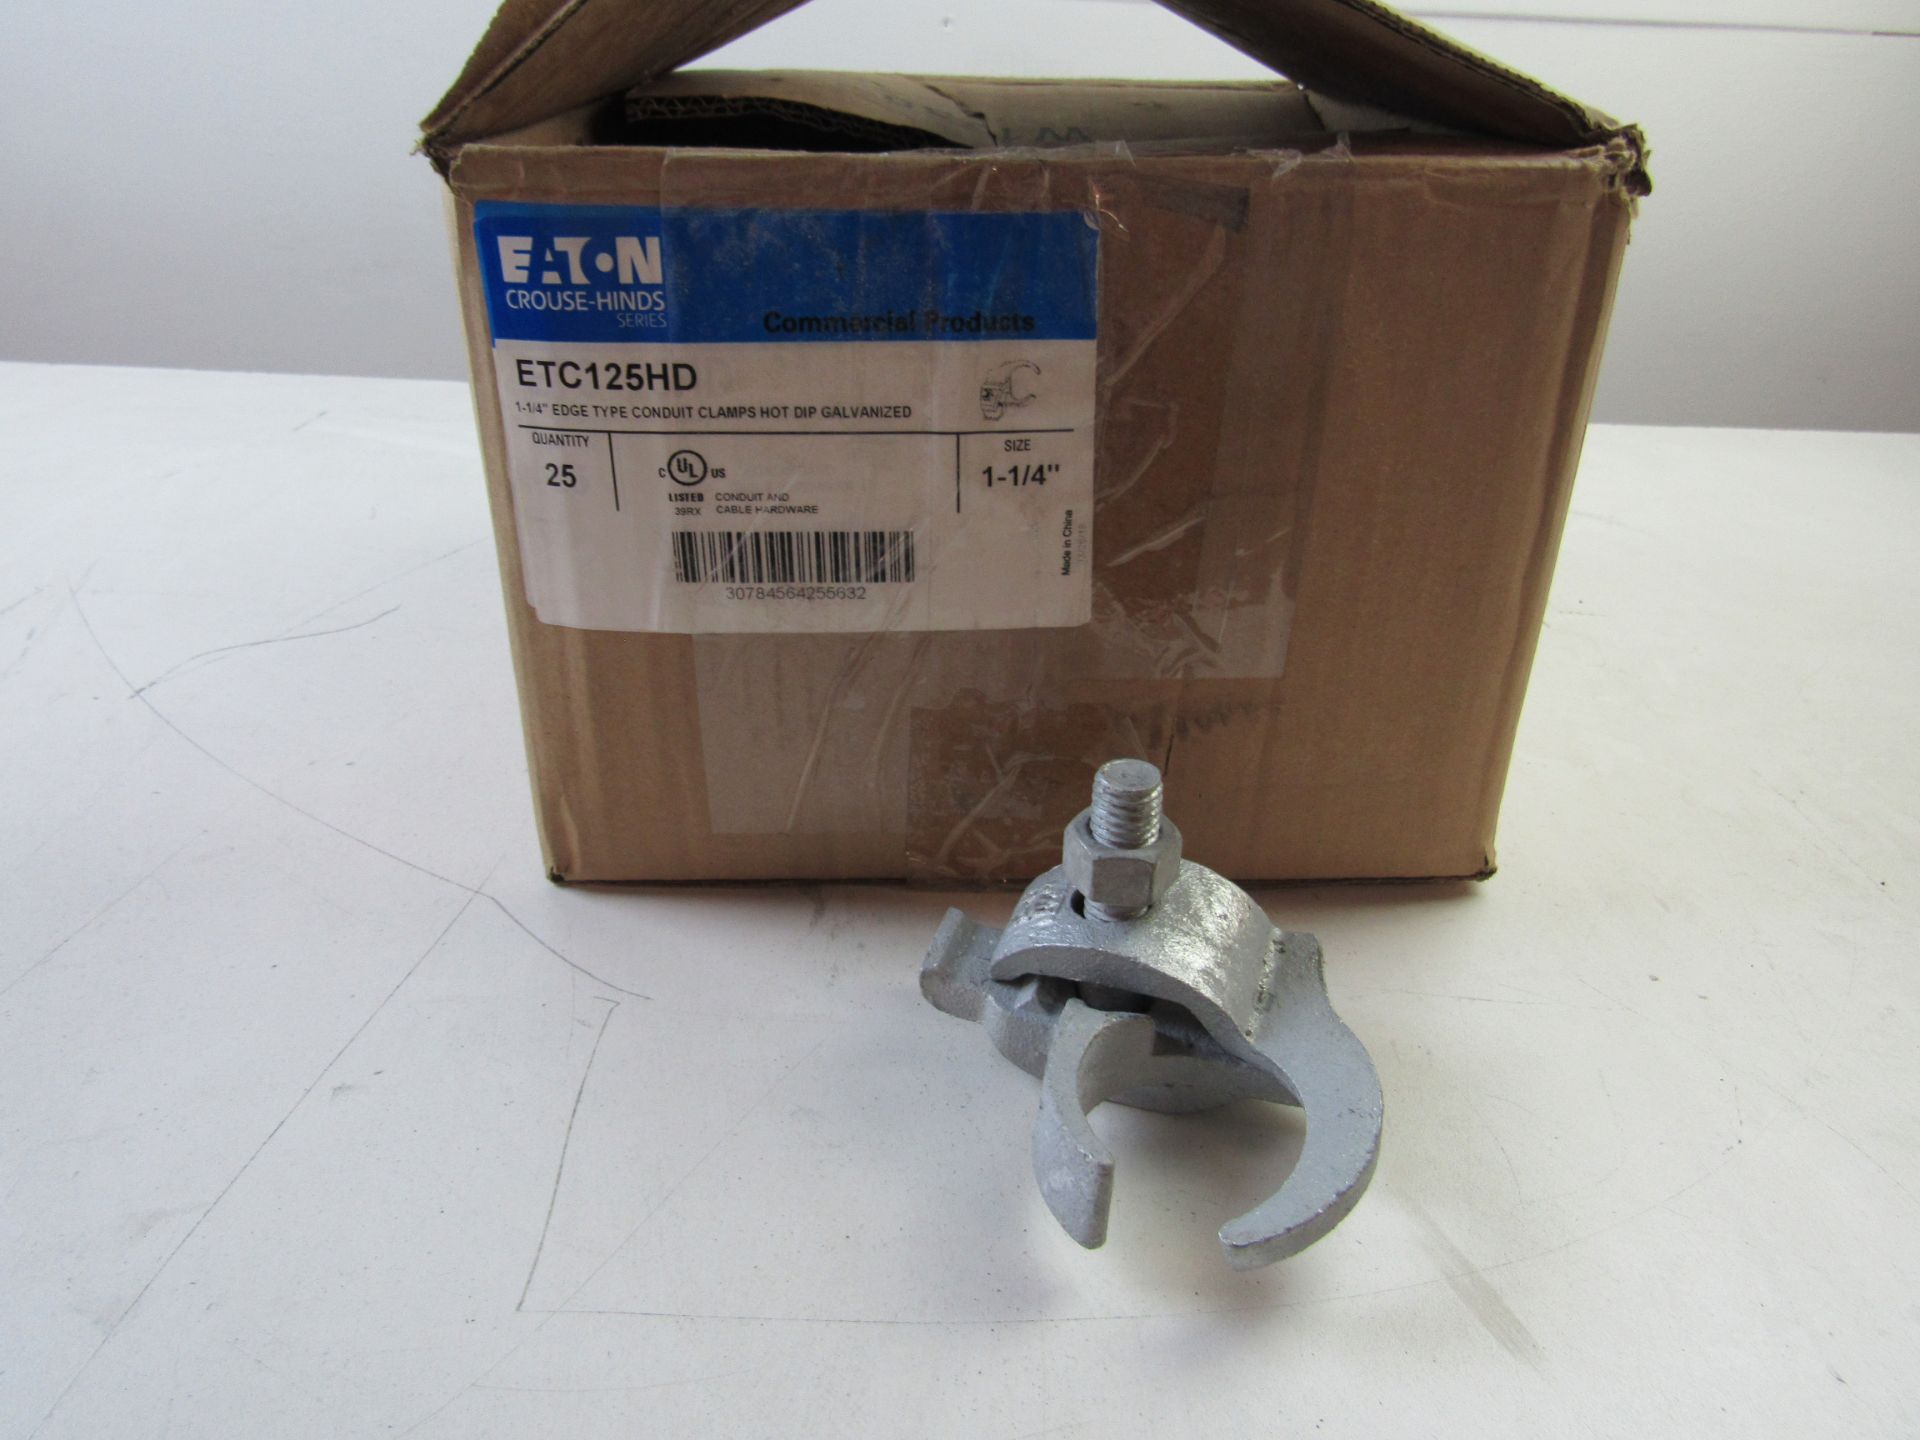 1x Eaton ETC125HD Outlet Boxes/Covers/Accessories Conduit Clamp 20BOX - Image 8 of 8